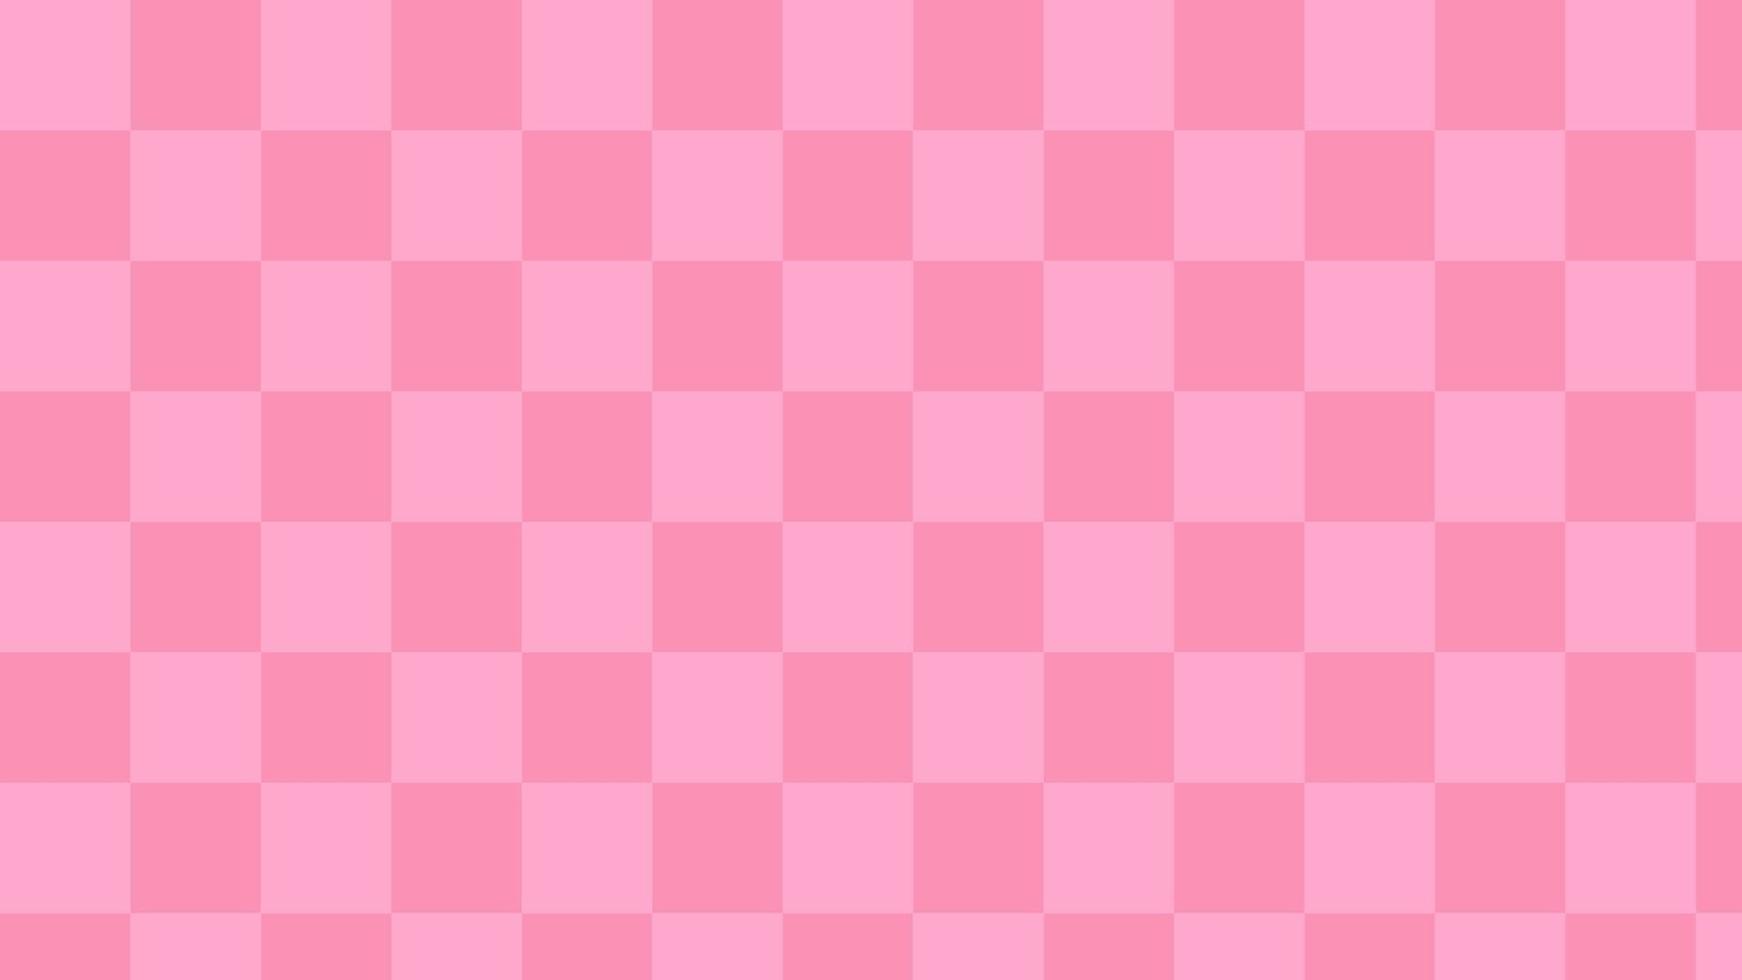 A pink and white checkered background - Hot pink